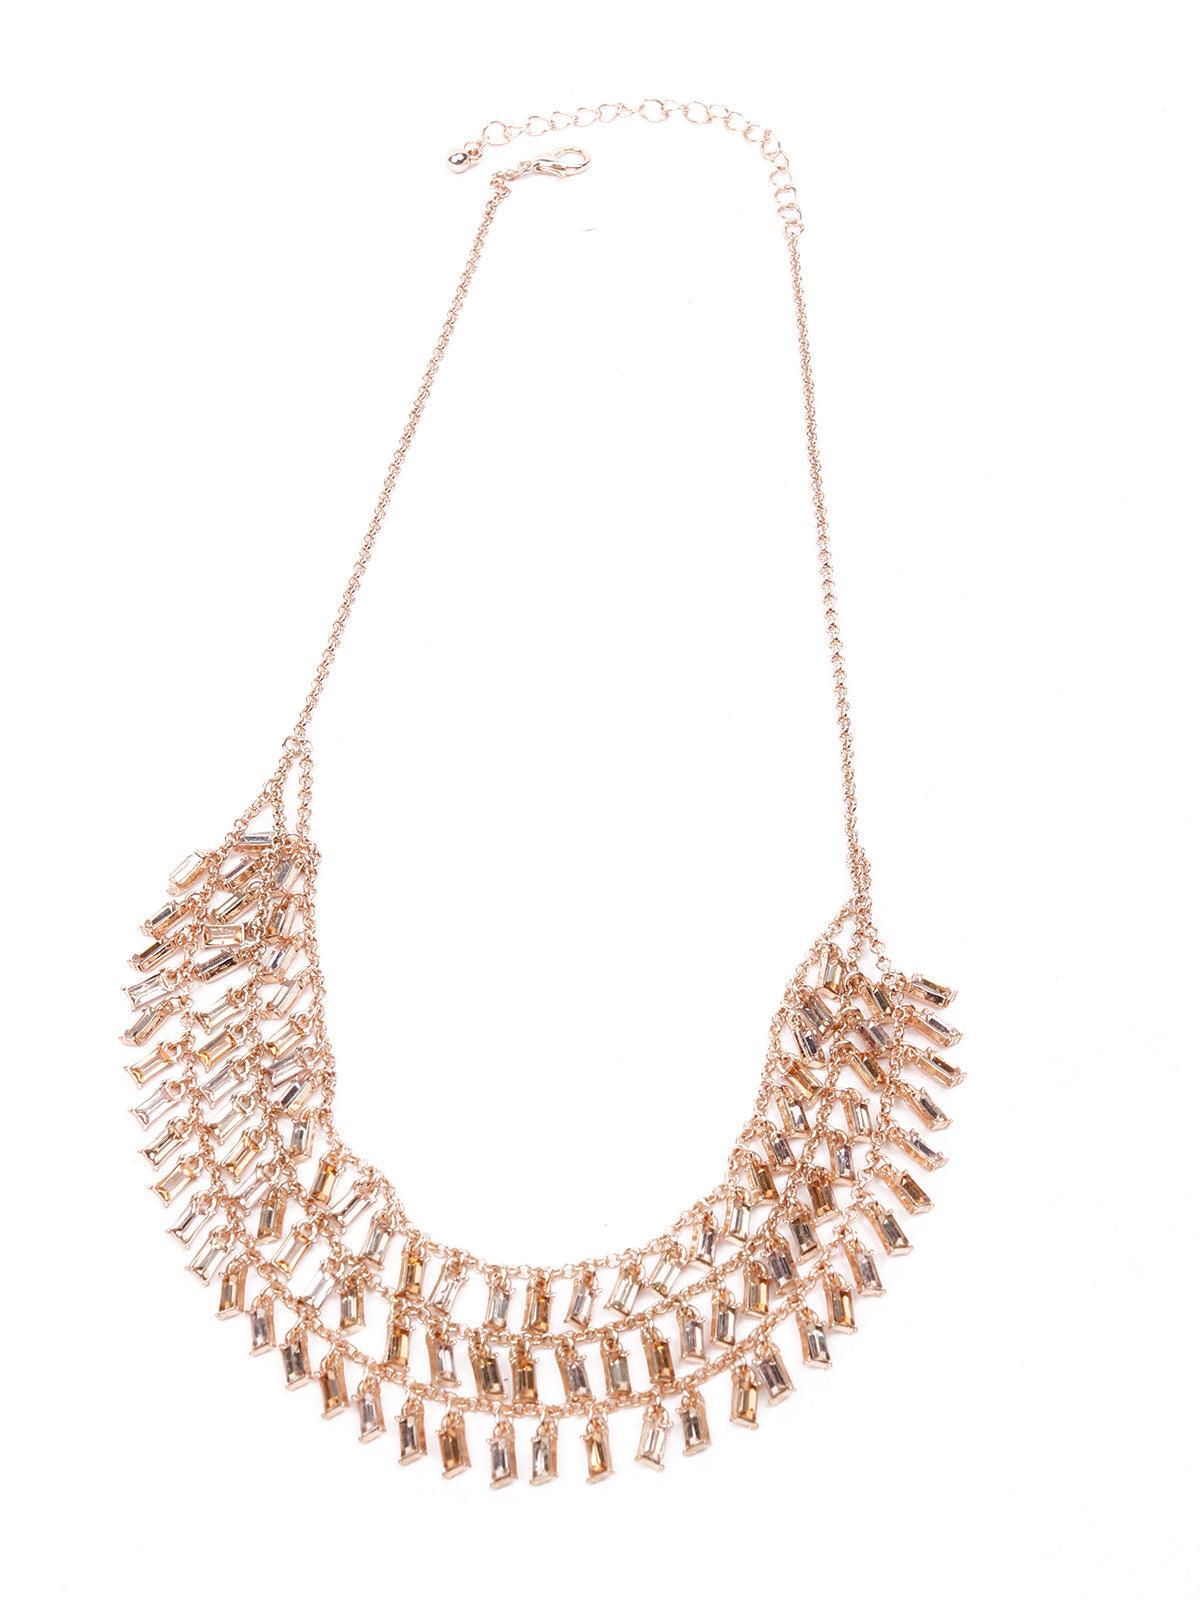 Women's Exquisite Layered Crystal Necklace - Gold - Odette